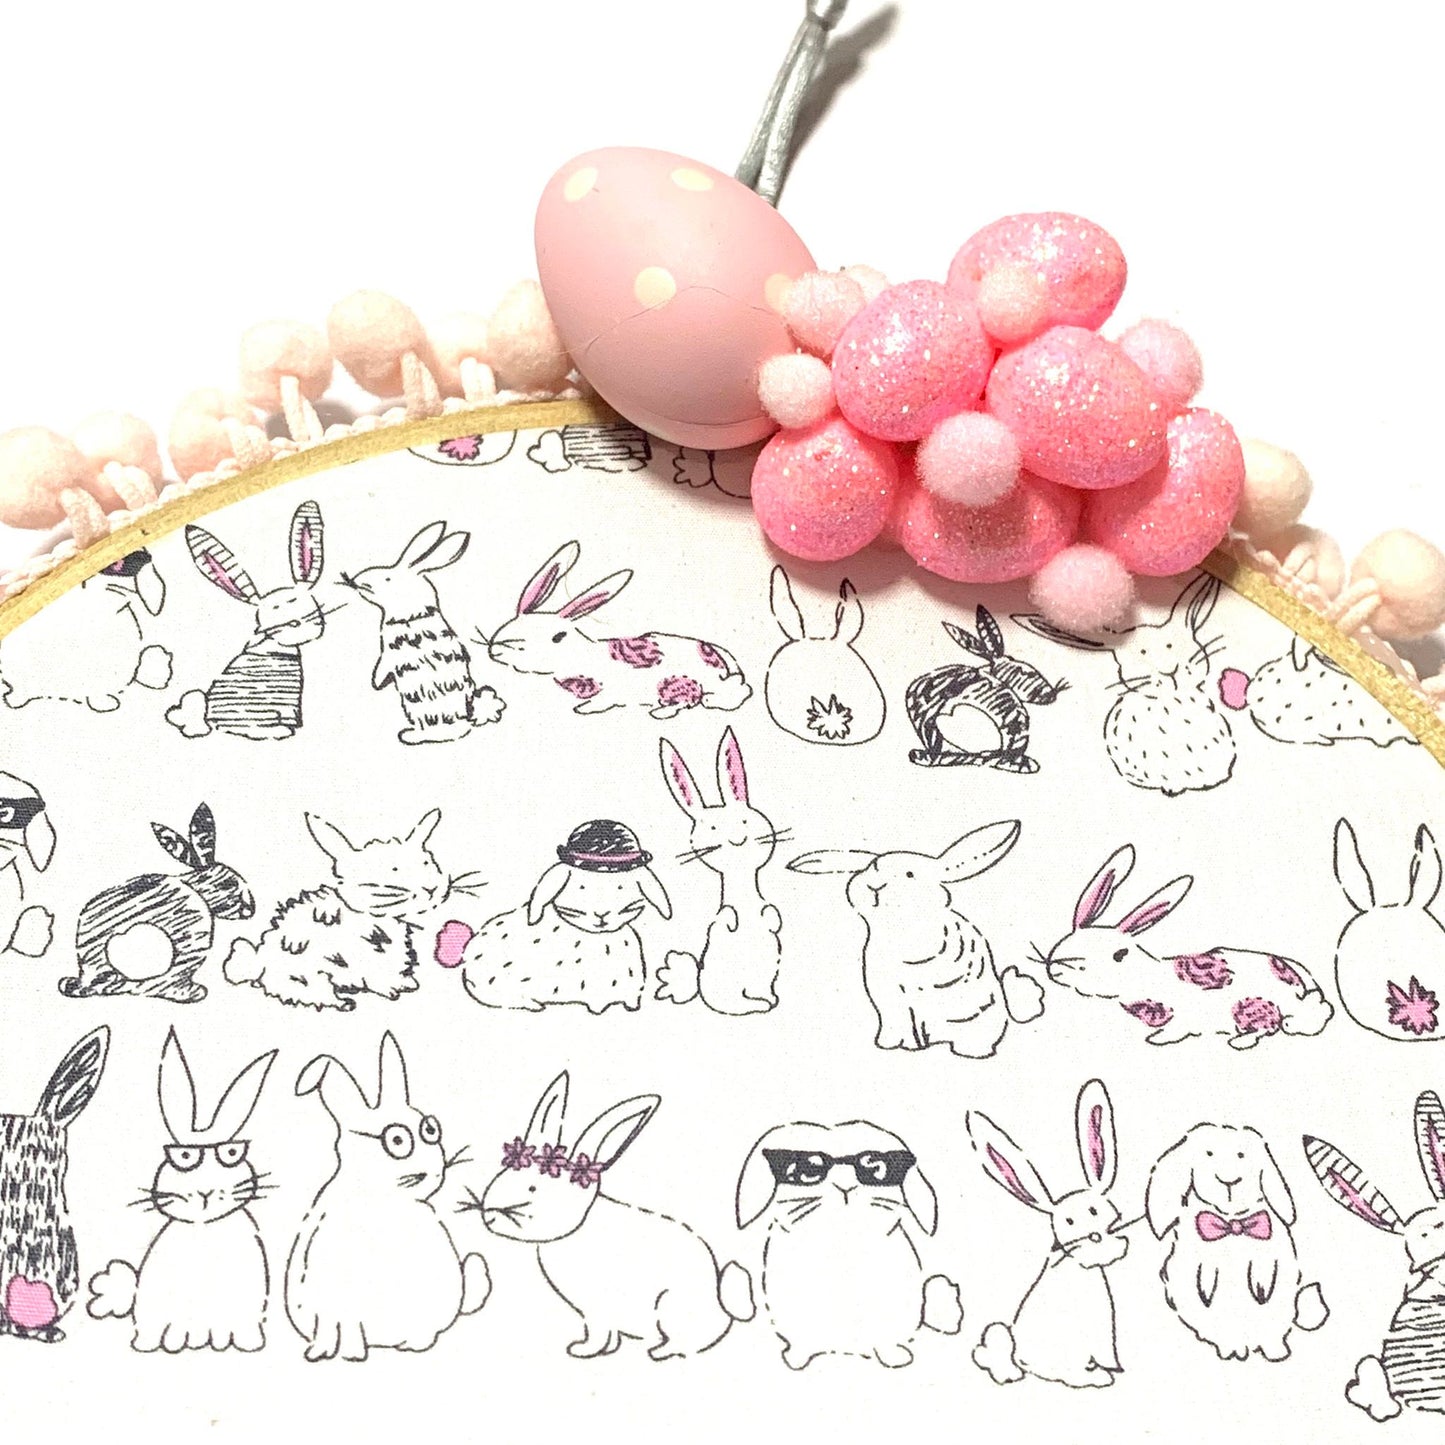 THIS BIRD HAS FLOWN- "Hipster Bunnies" Large Embroidery Hoop Easter Decoration